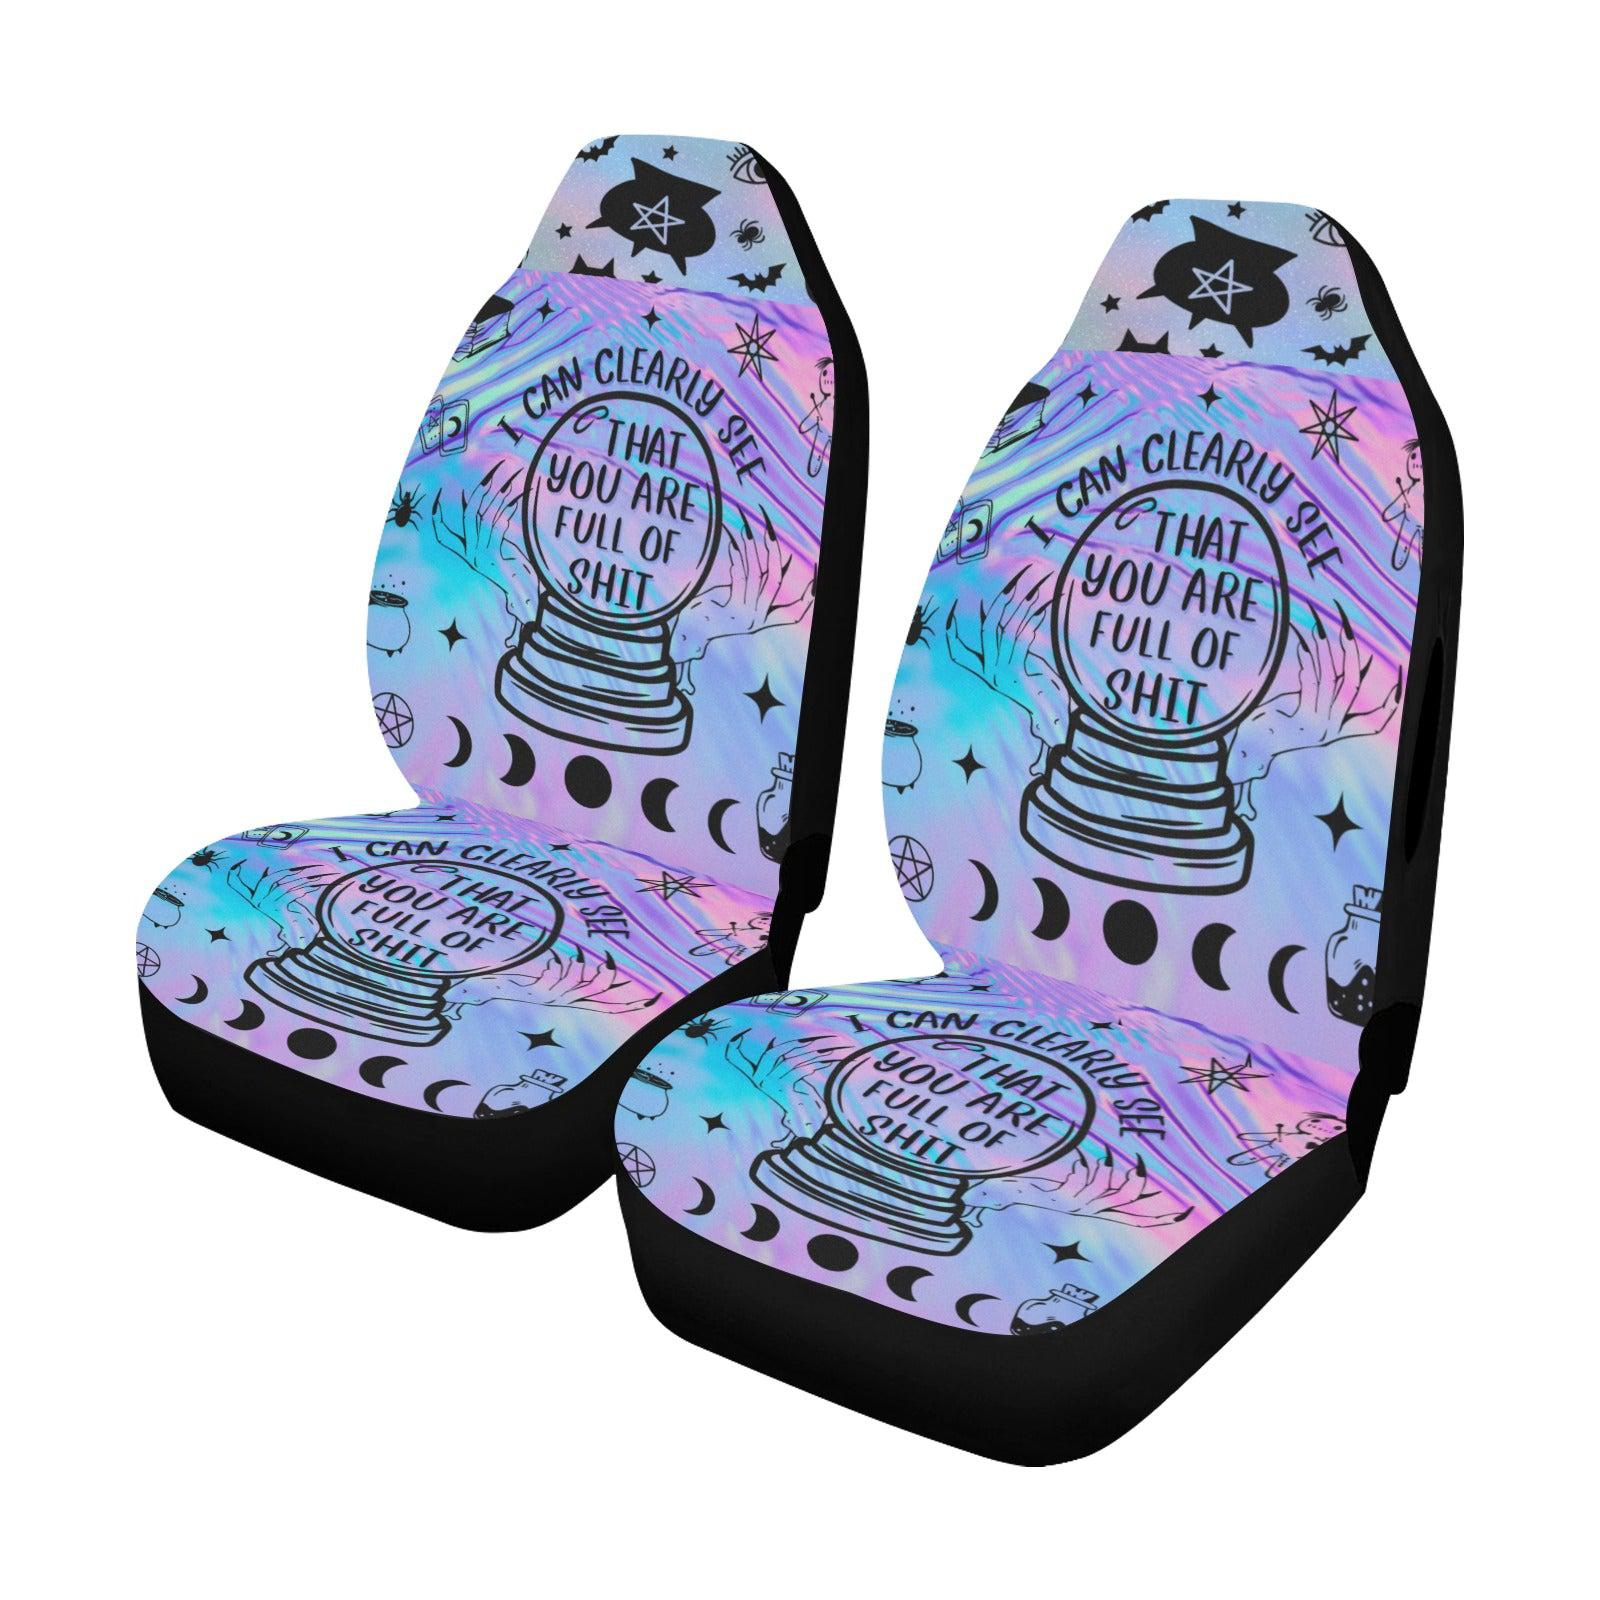 Crystal ball witch Car Seat Covers-MoonChildWorld